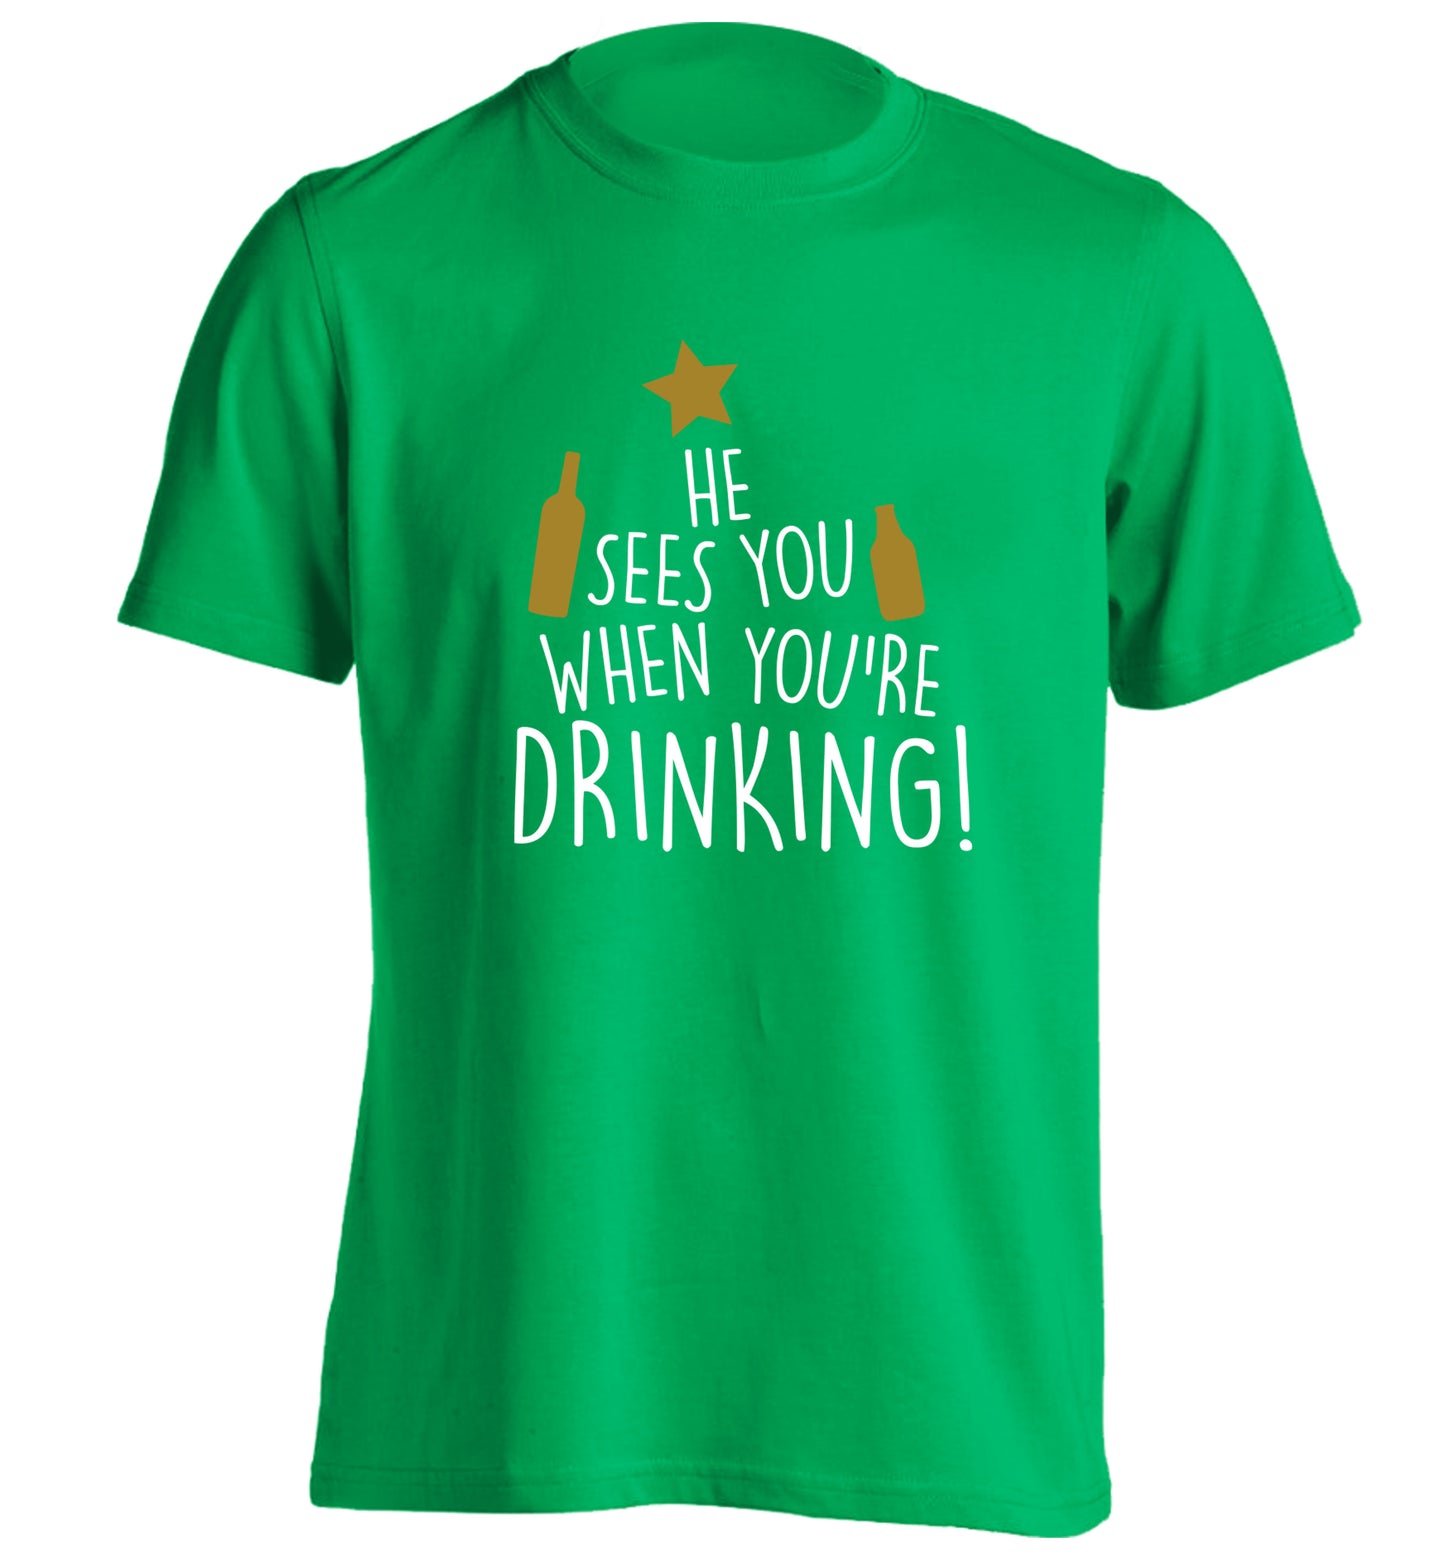 He sees you when you're drinking adults unisex green Tshirt 2XL